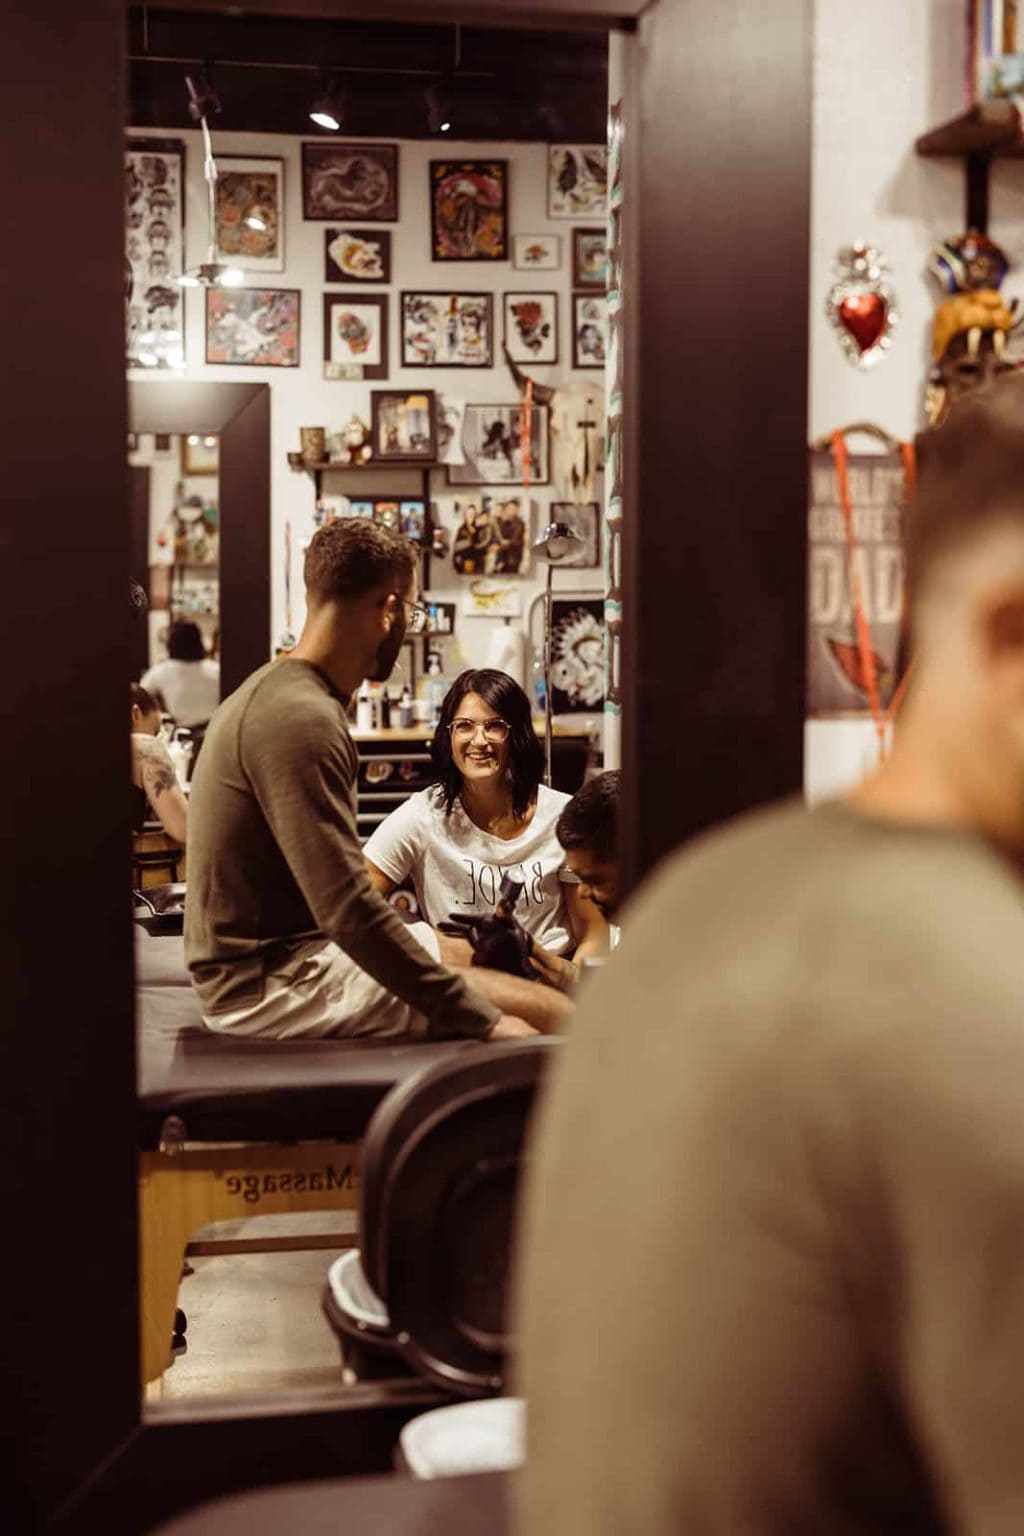 An engaged couple spending time together getting a tattoo to prepare for their wedding day